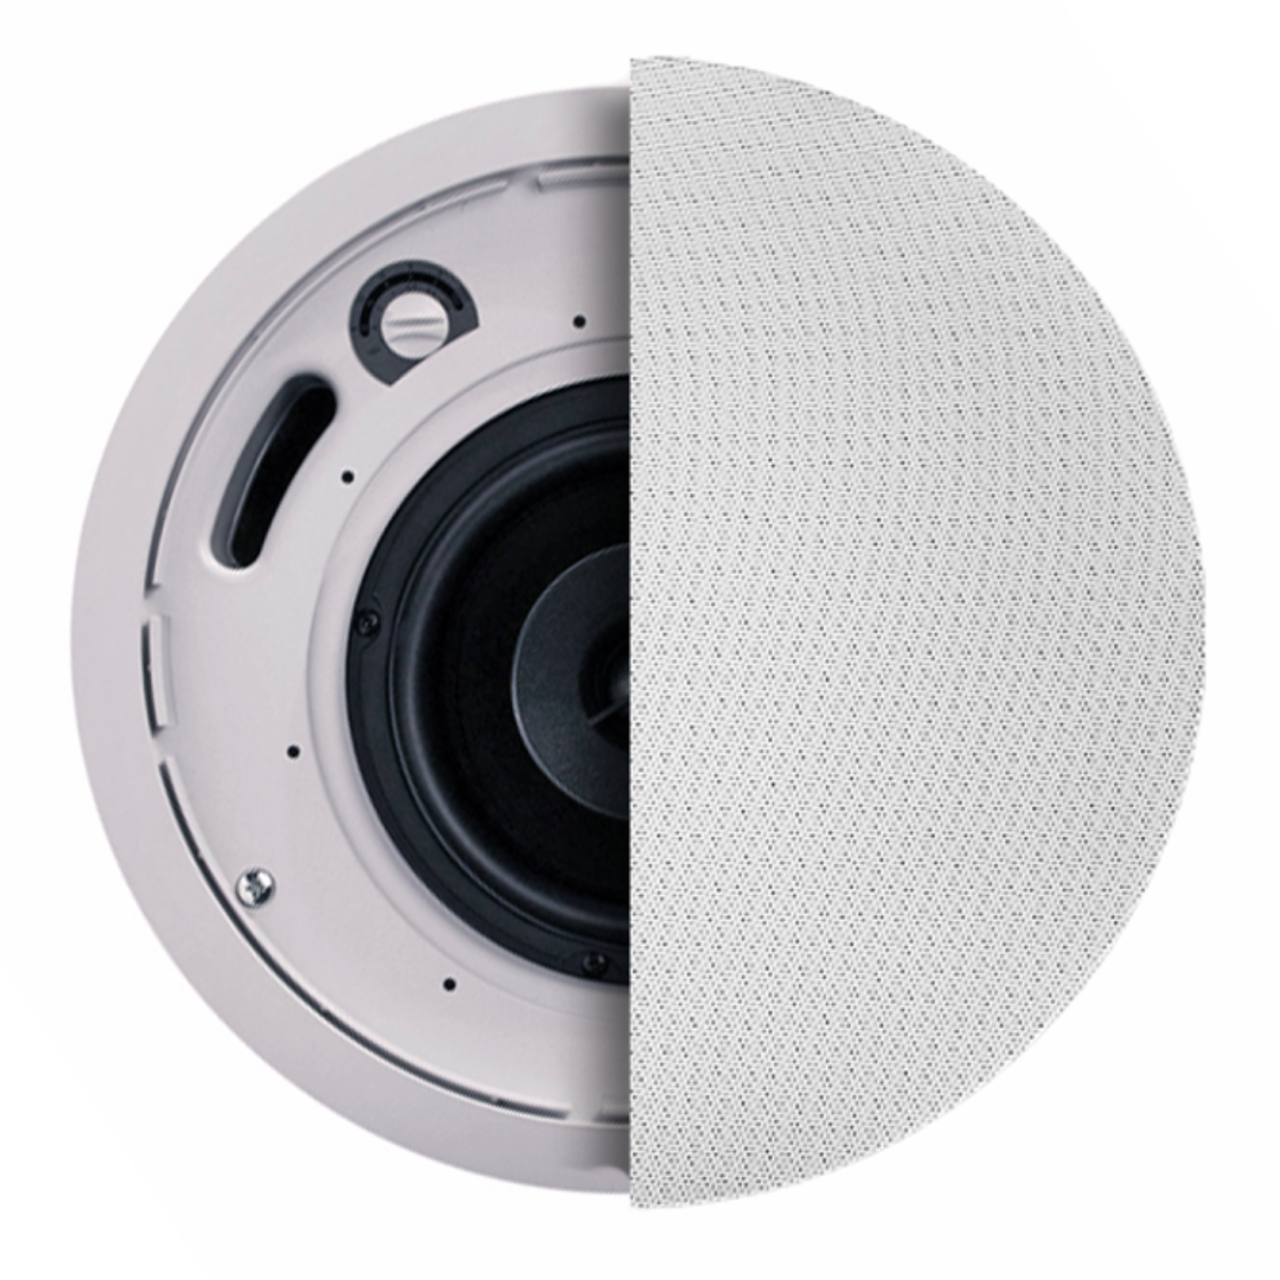 SoundTube IPD-CM62-BGM-II-WH 6" IP-Addressable, Dante-Enabled In-Ceiling Speaker with Seamless Magnetic White Grille (IPD-CM62-BGM-II-WH)